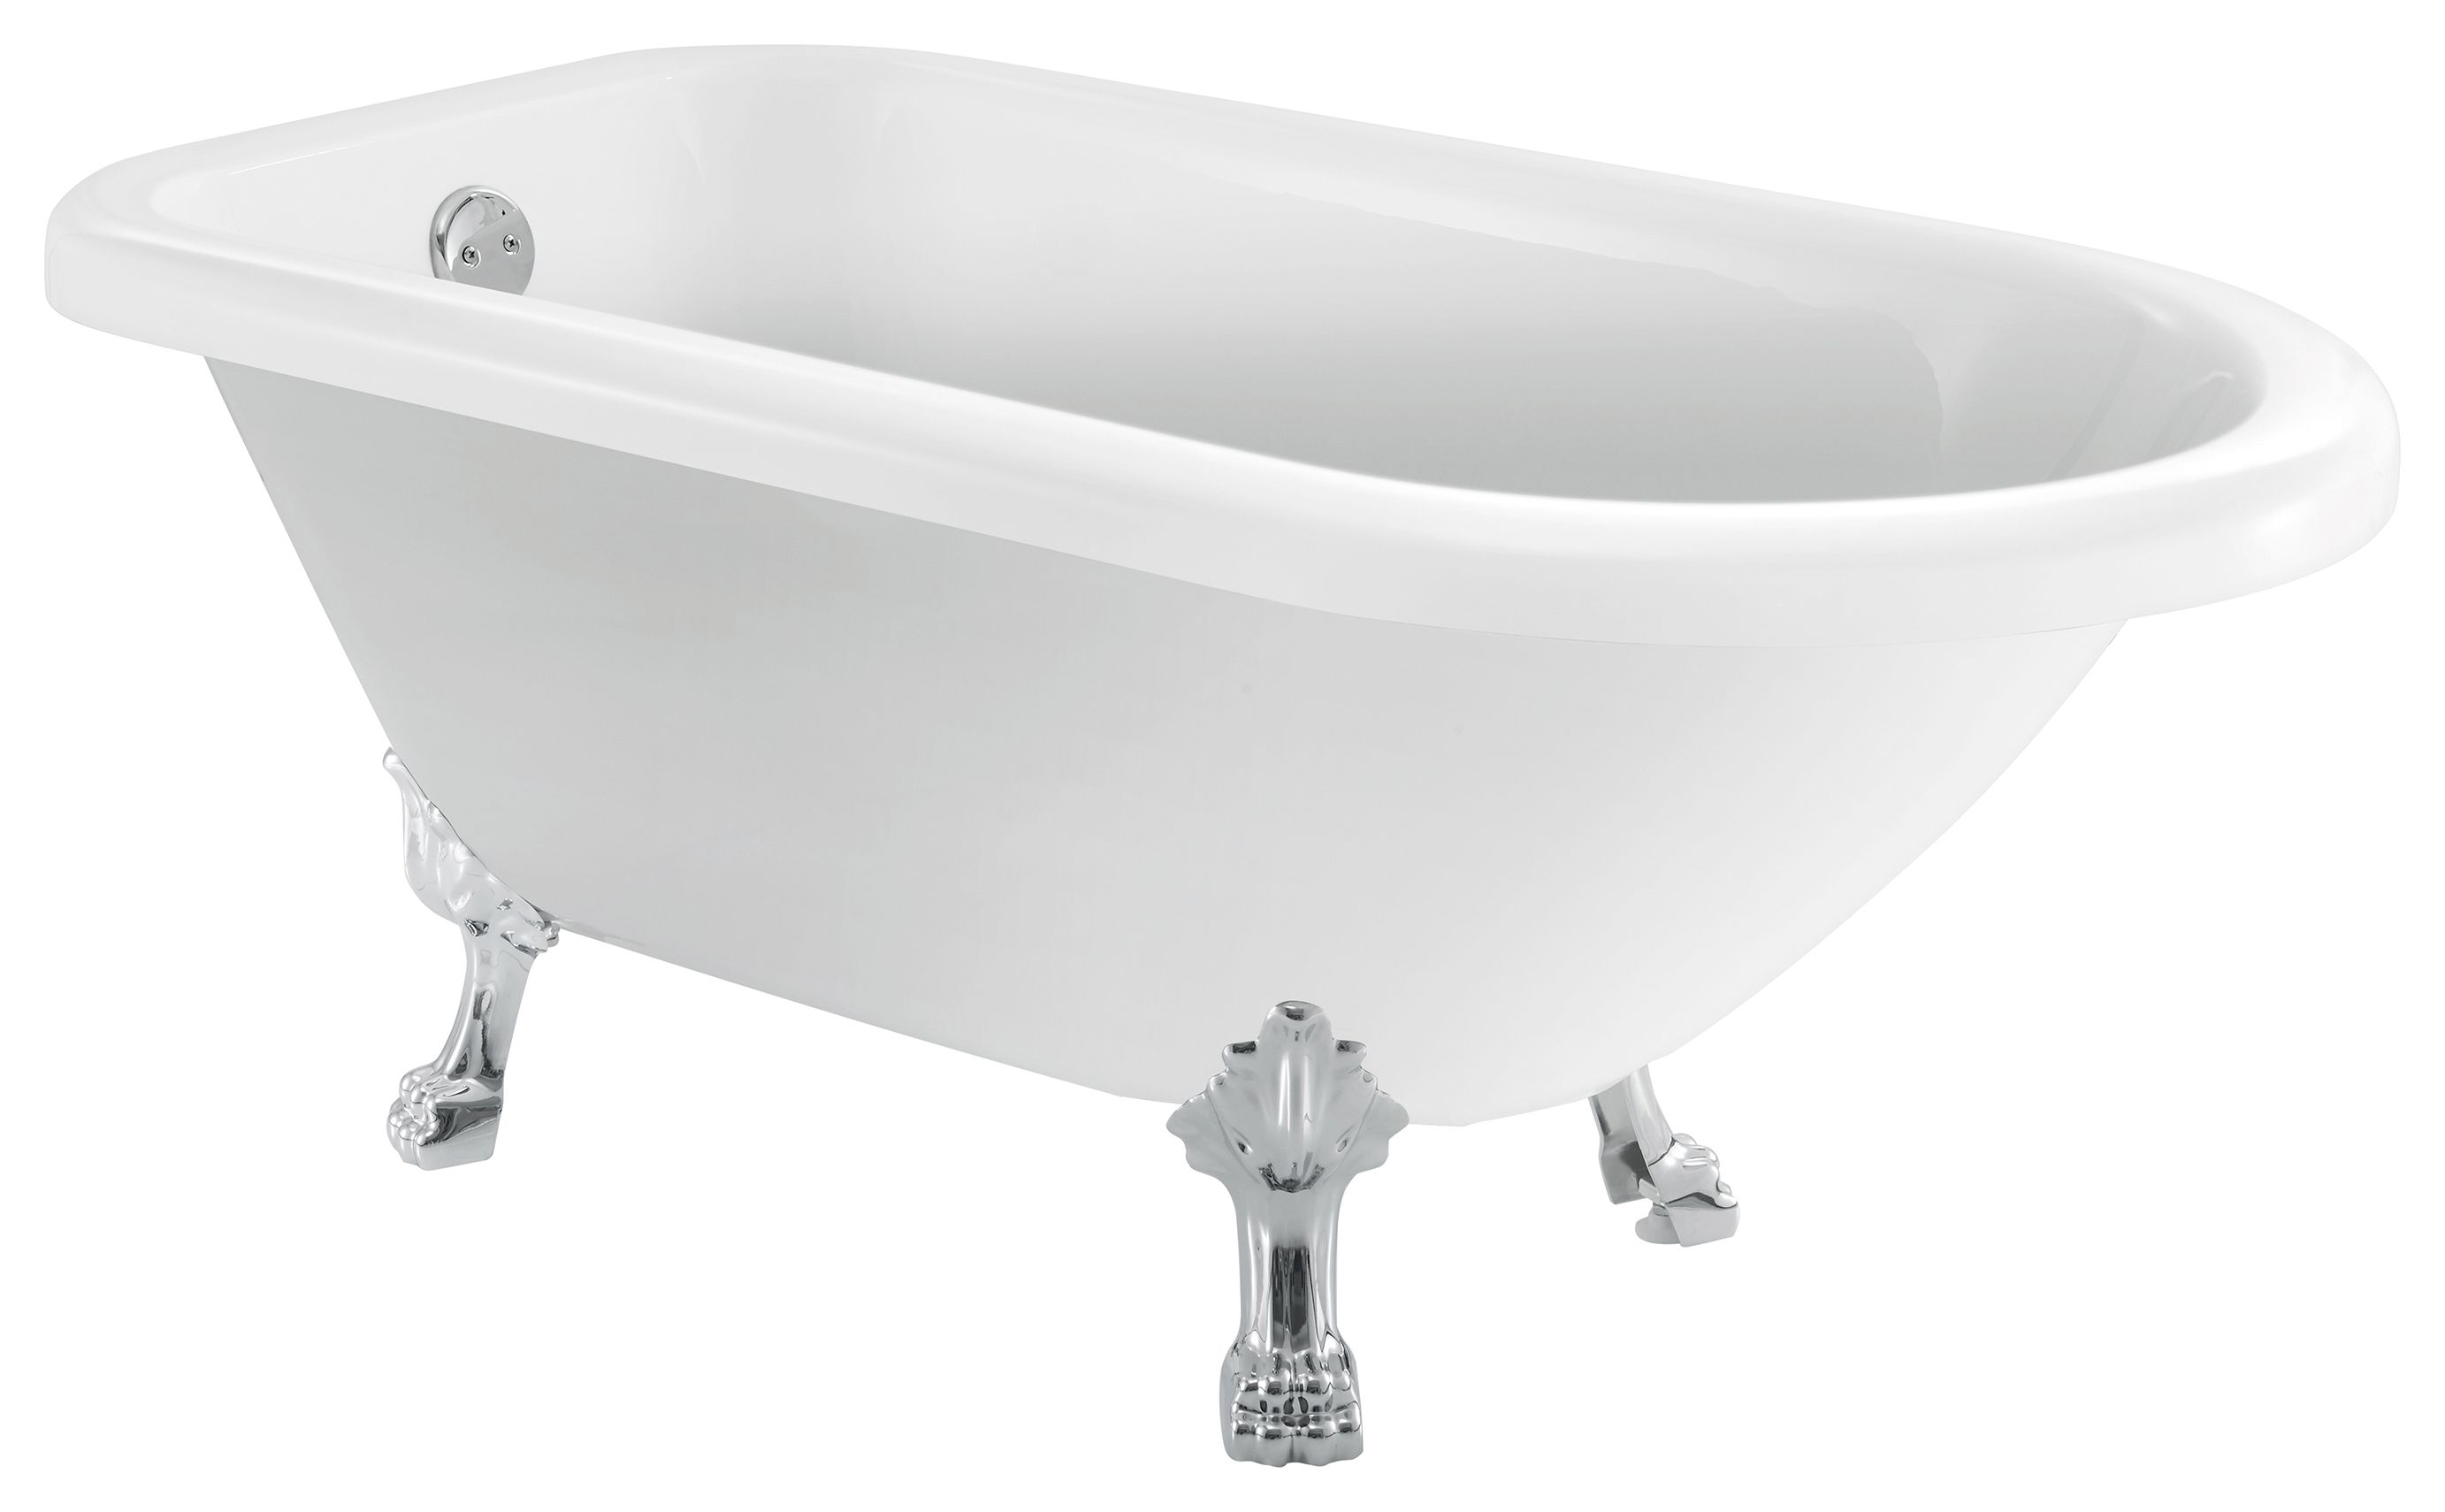 Image of Wickes Warwick Freestanding Traditional Single Ended Roll Top Bath - 1570 x 635mm